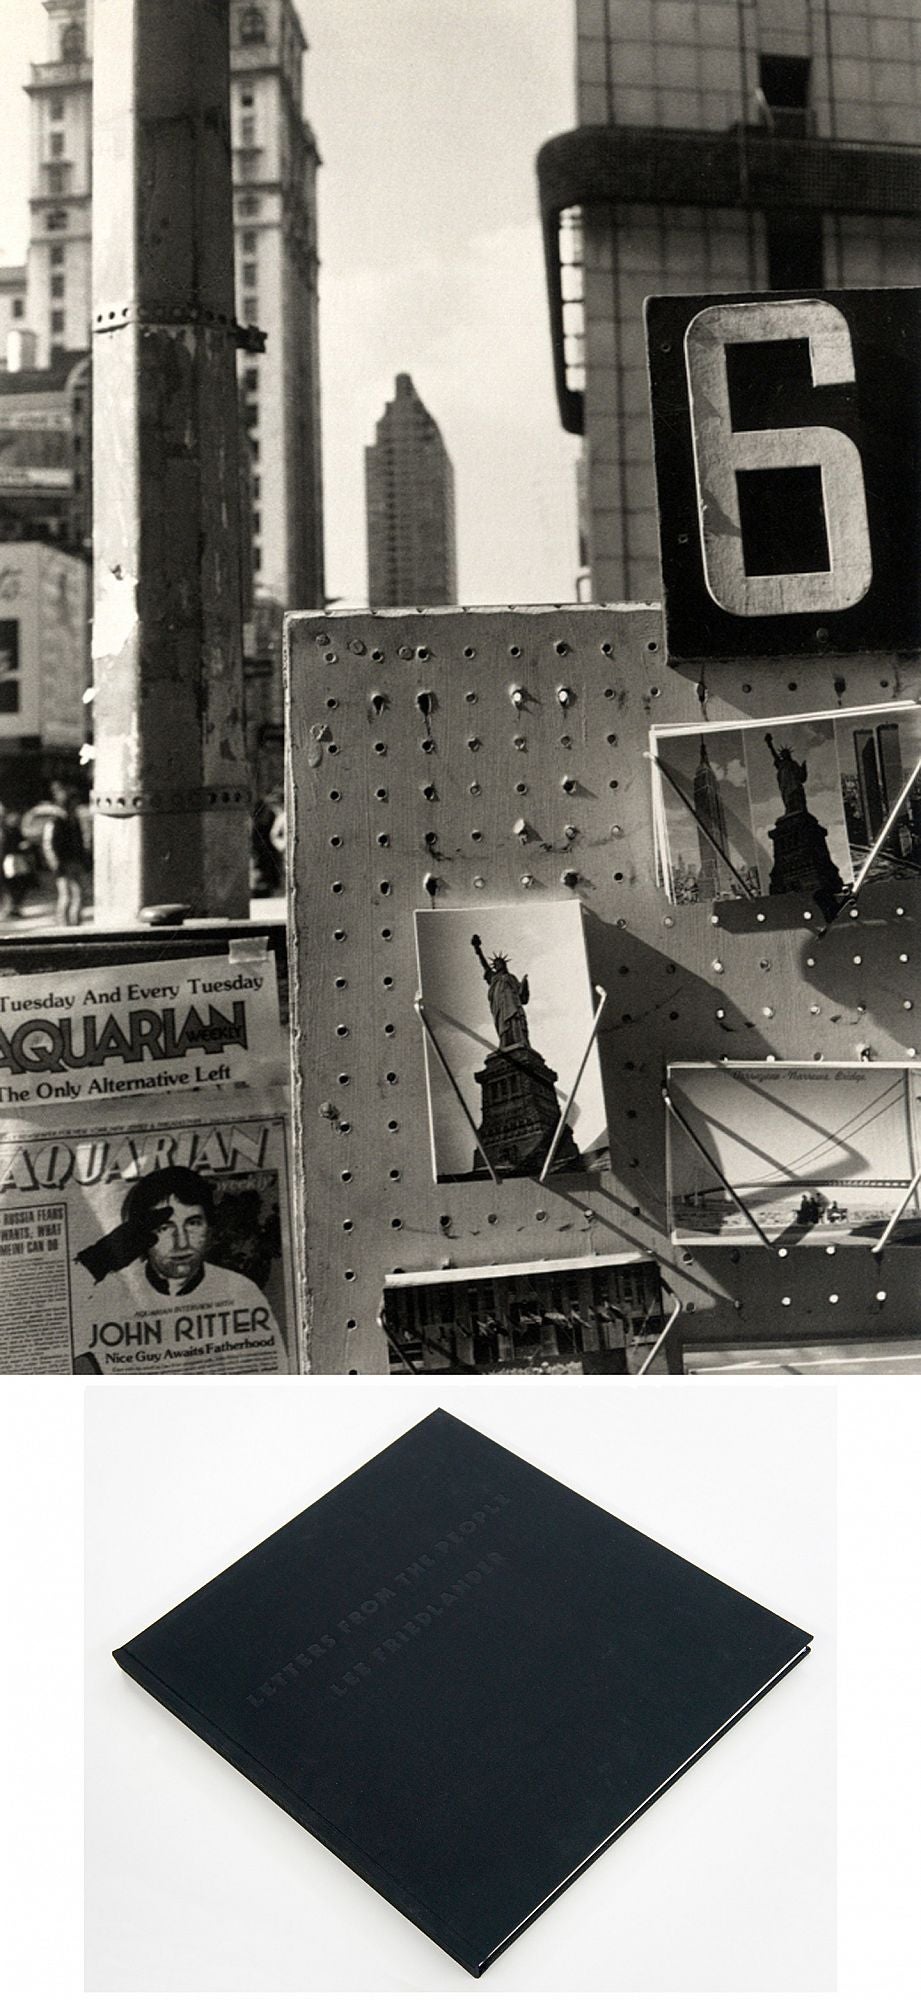 Lee Friedlander: Letters from the People (Special Limited Edition with One Vintage Gelatin Silver Print: "6")